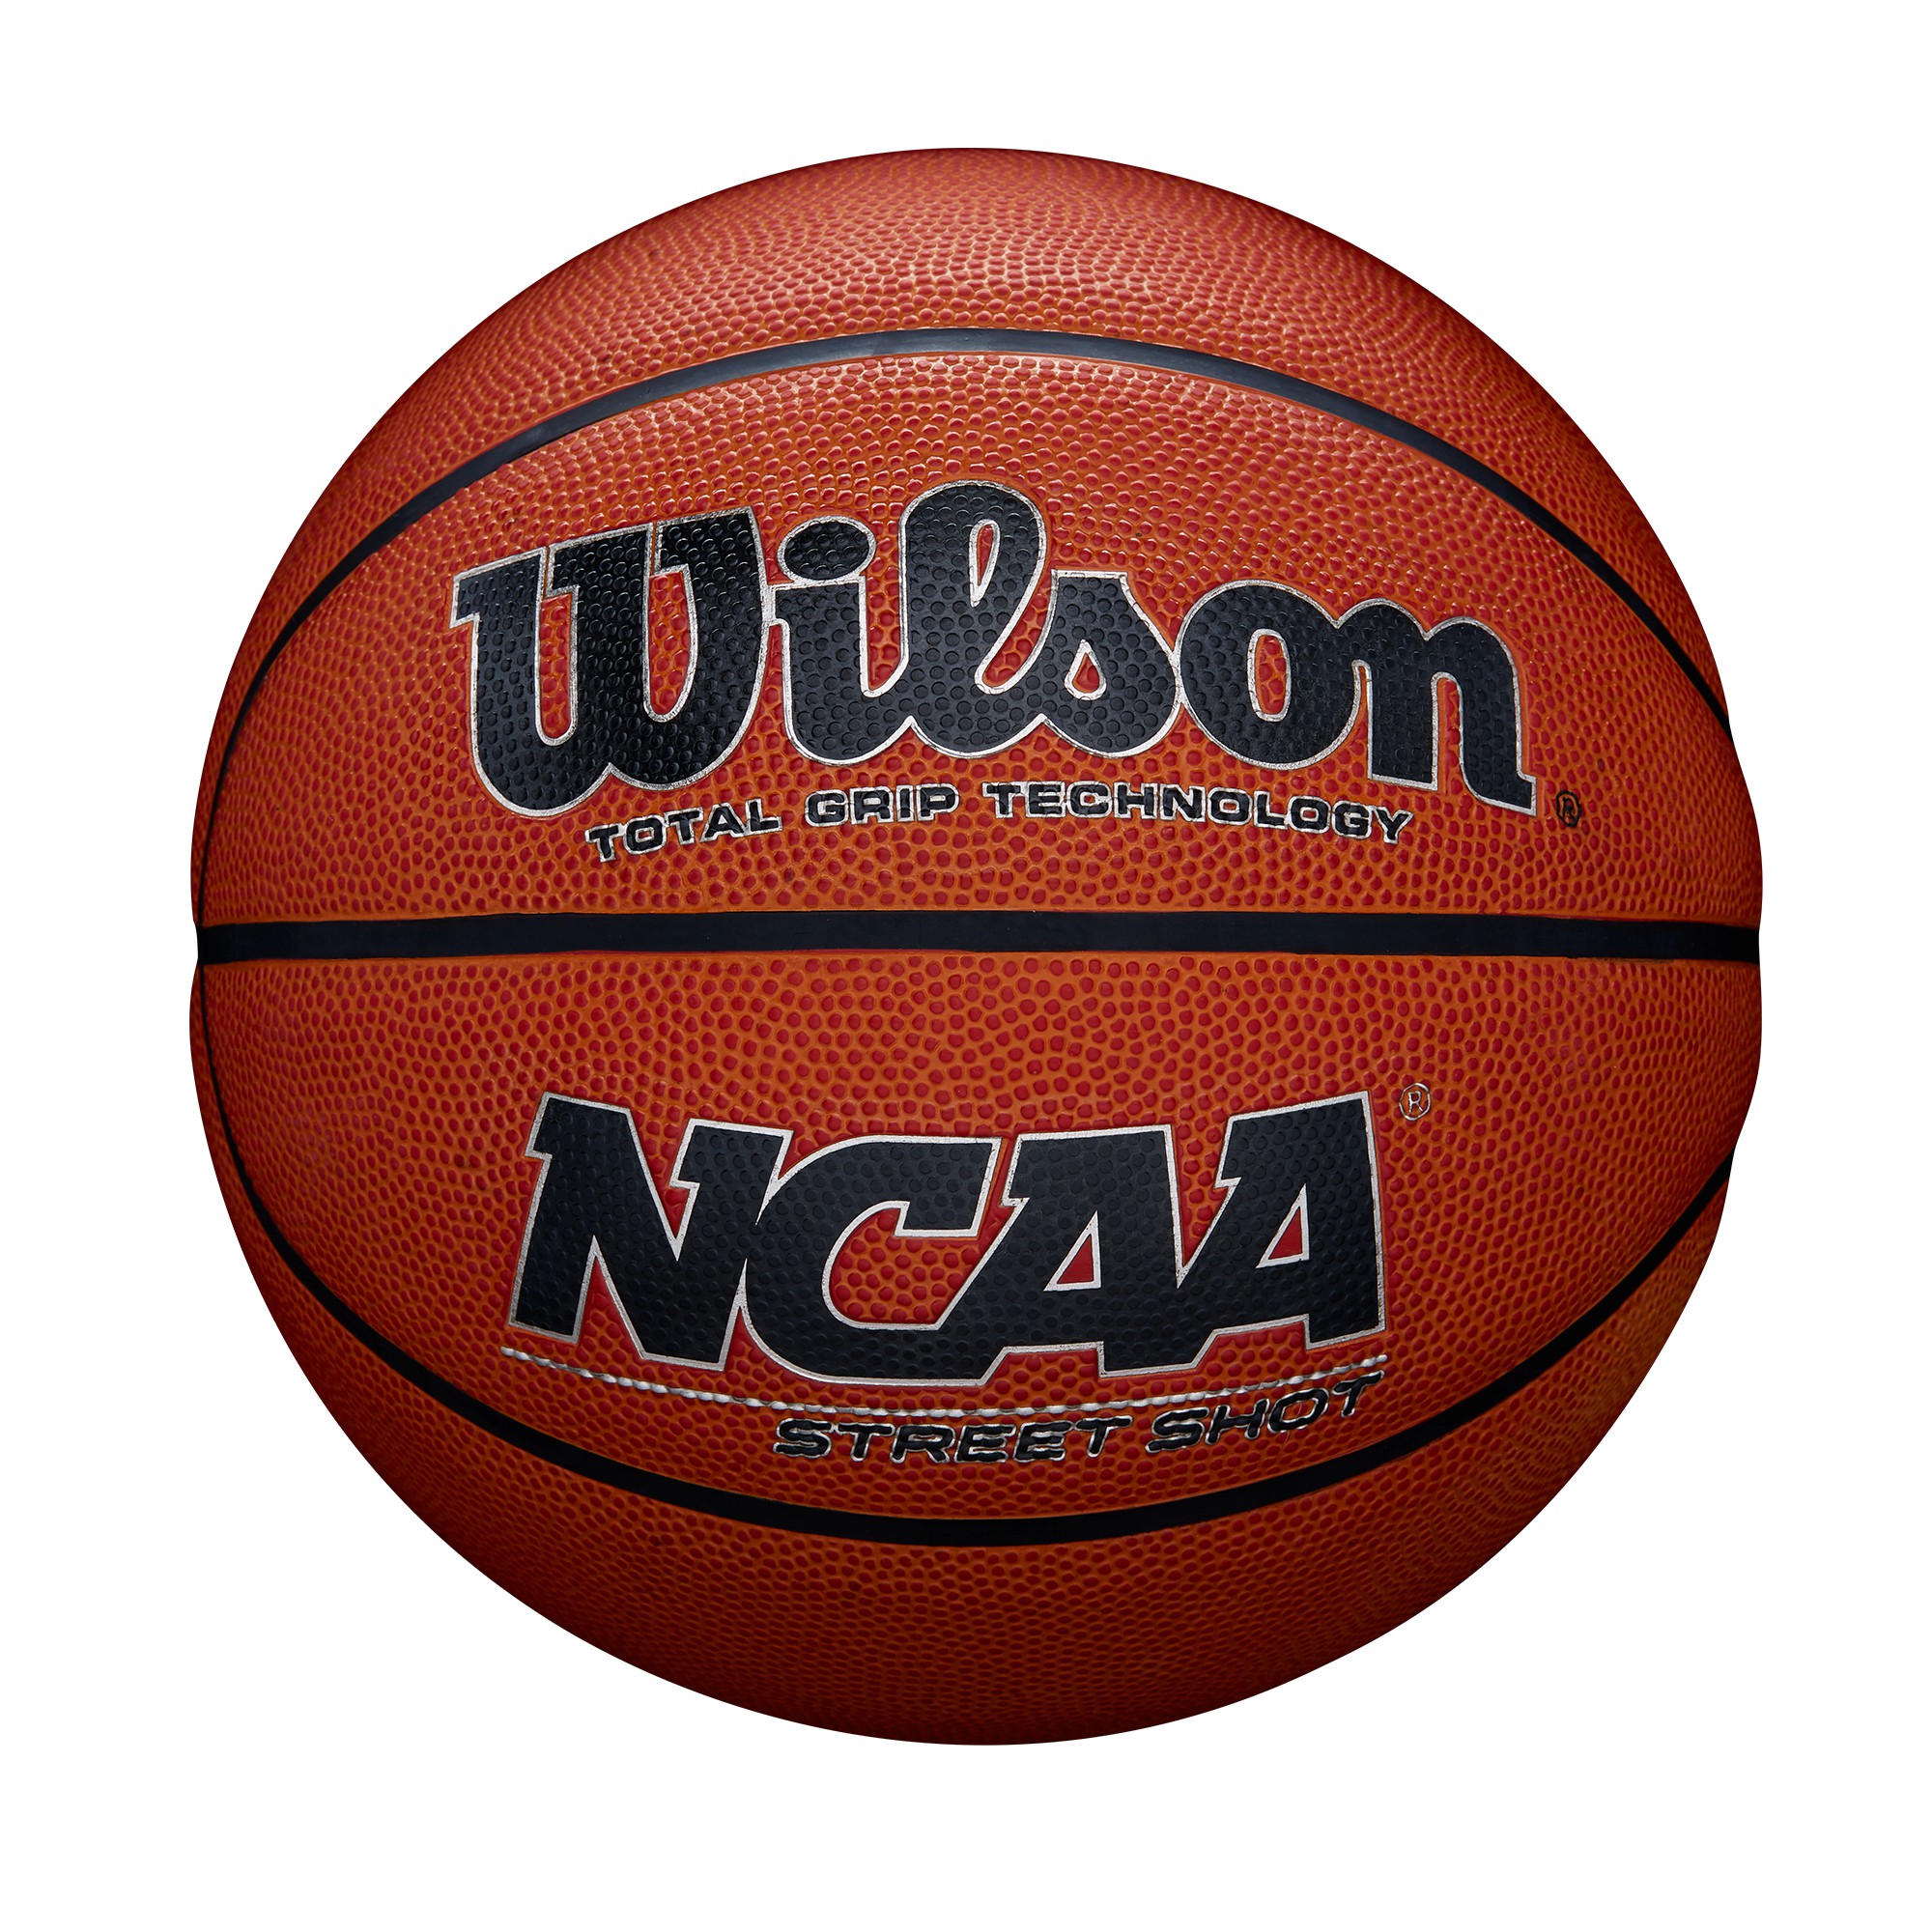 Wilson NCAA Street Shot Outdoor Basketball, Official Size 29.5" - image 1 of 6